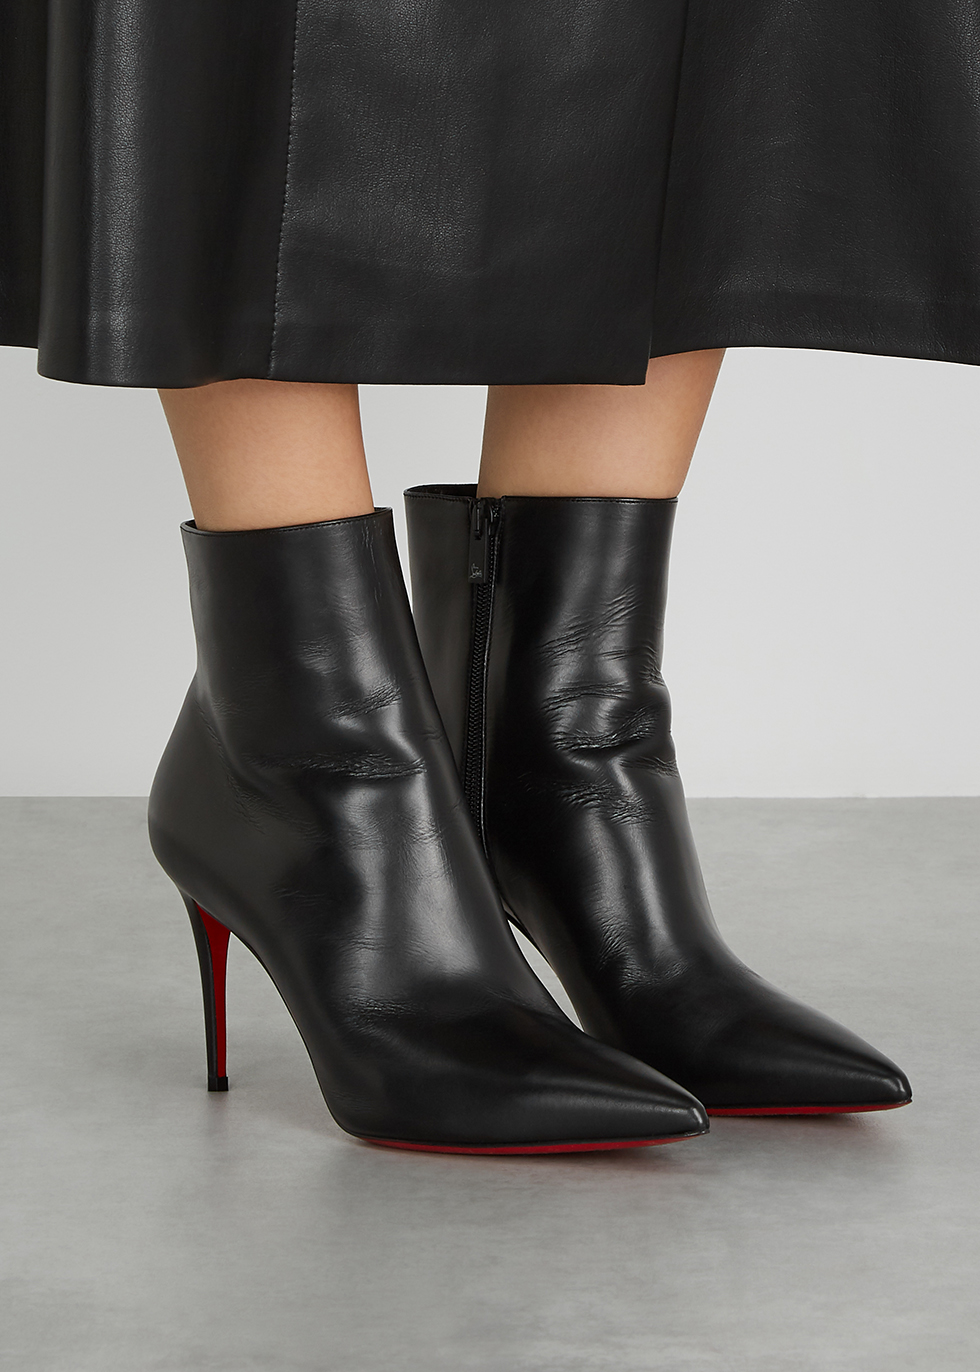 christian louboutin ankle booties